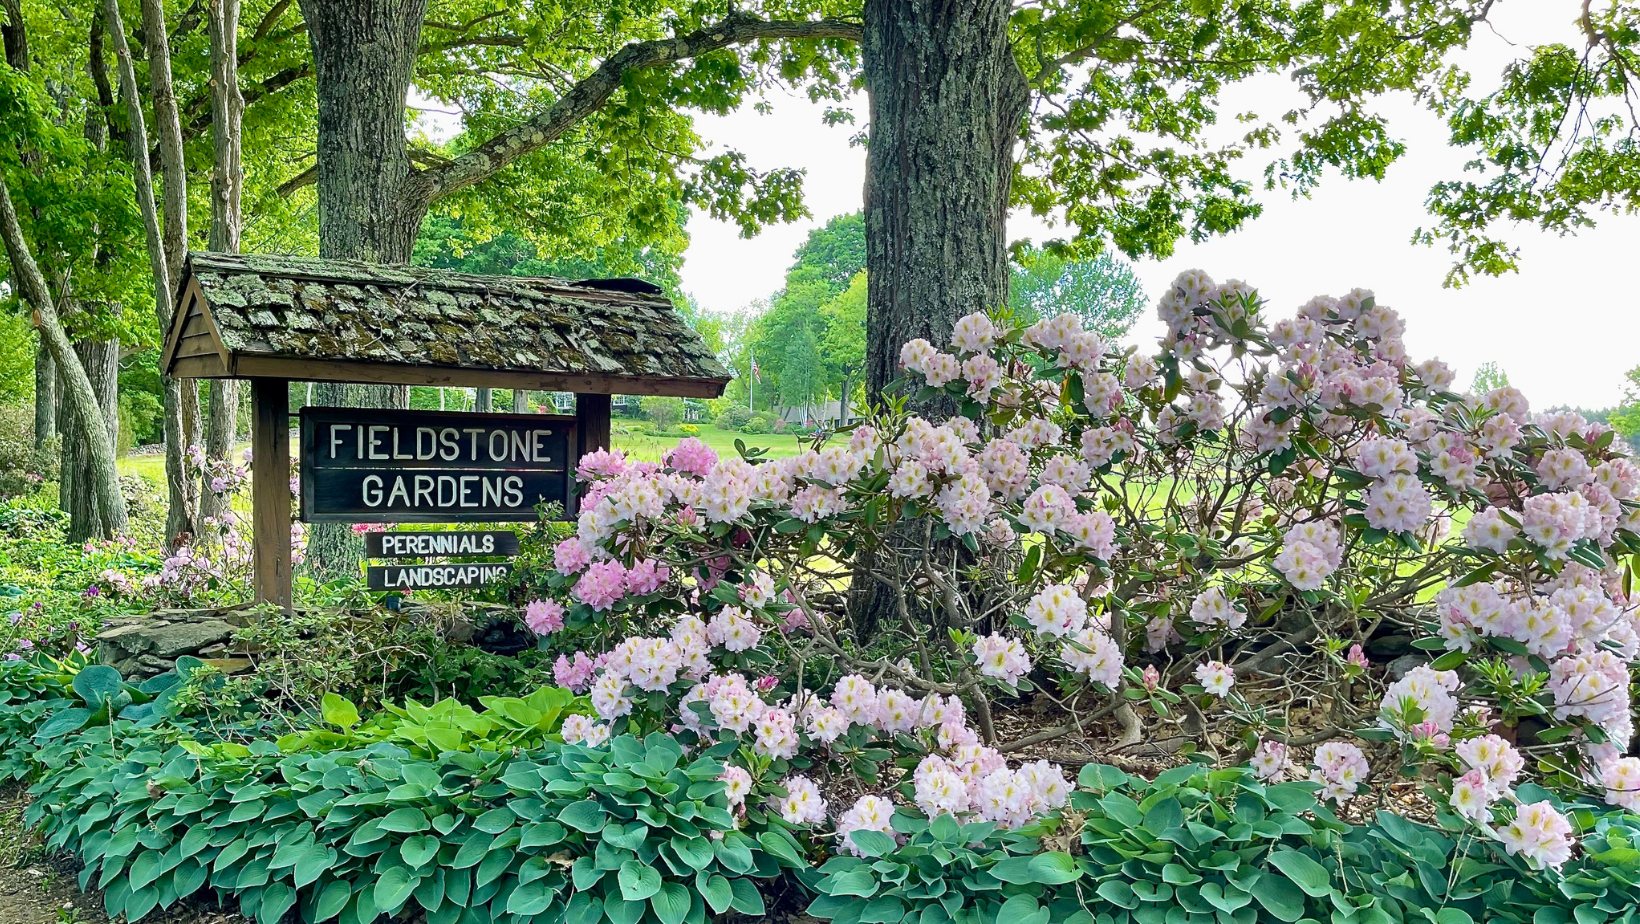 Entrance sign with moss covered shingles on the roof, a pink rhododendron in bloom and hosta edging the garden